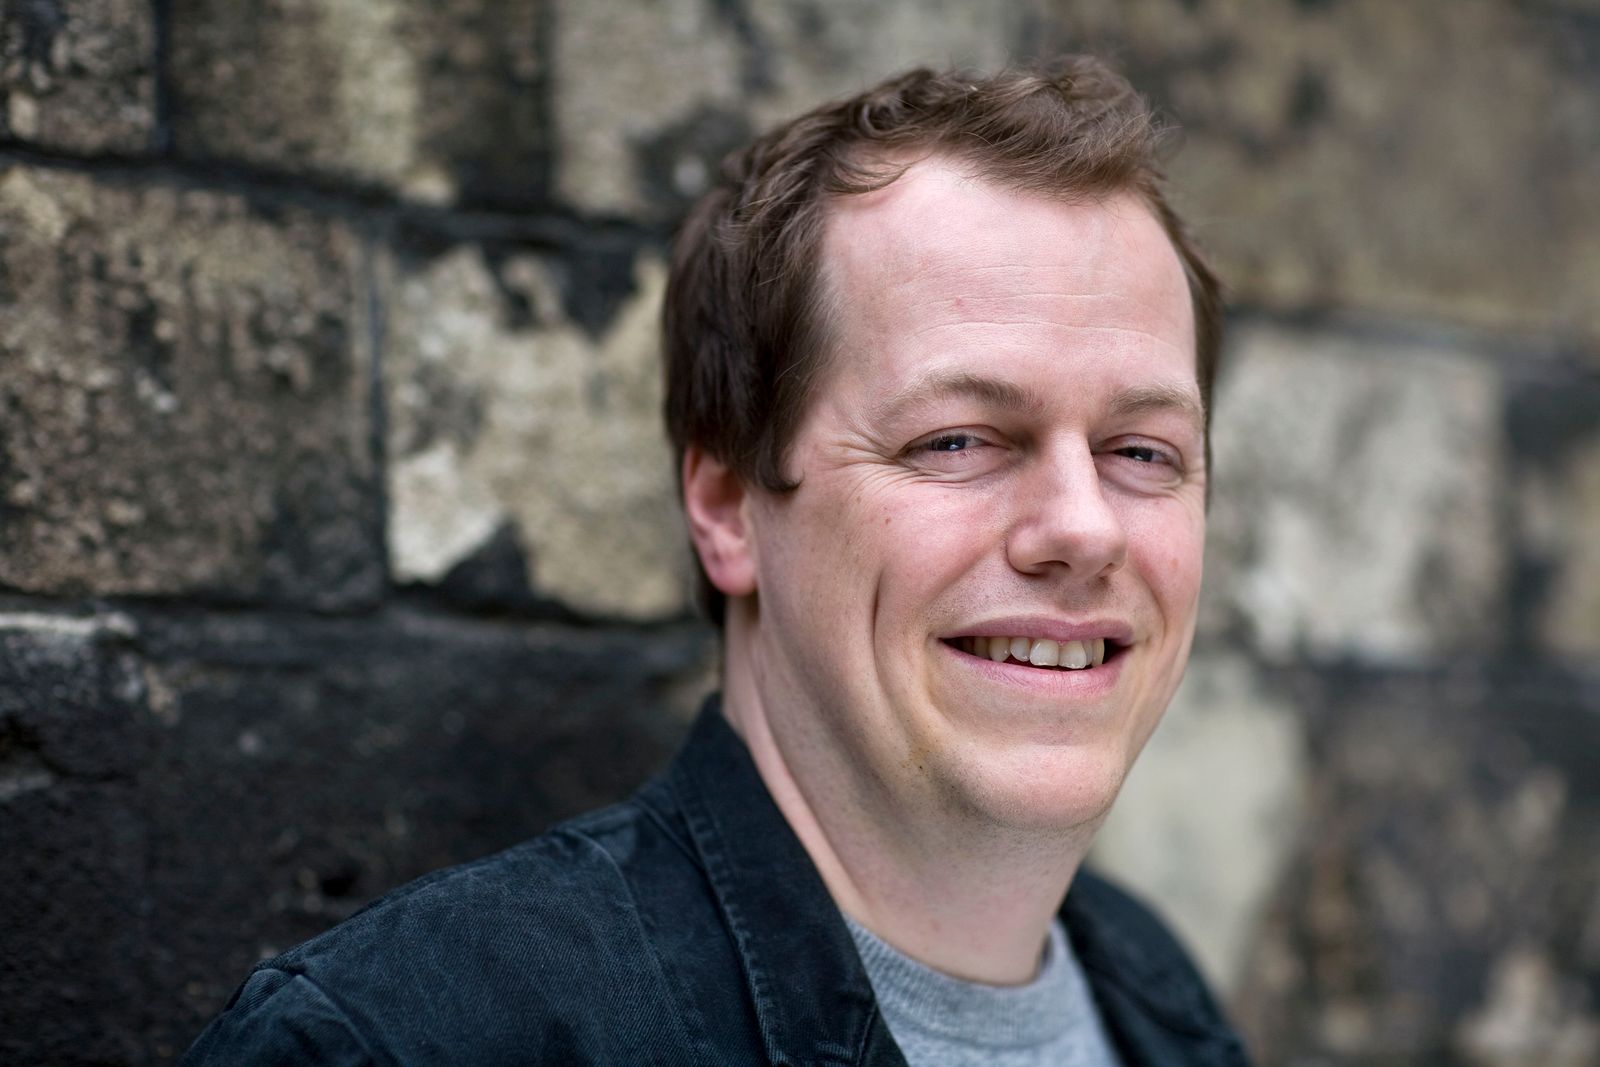 Tom Parker Bowles poses for a portrait at the Oxford Literary Festival in Christ Church, on March 26, 2010 | Getty Images